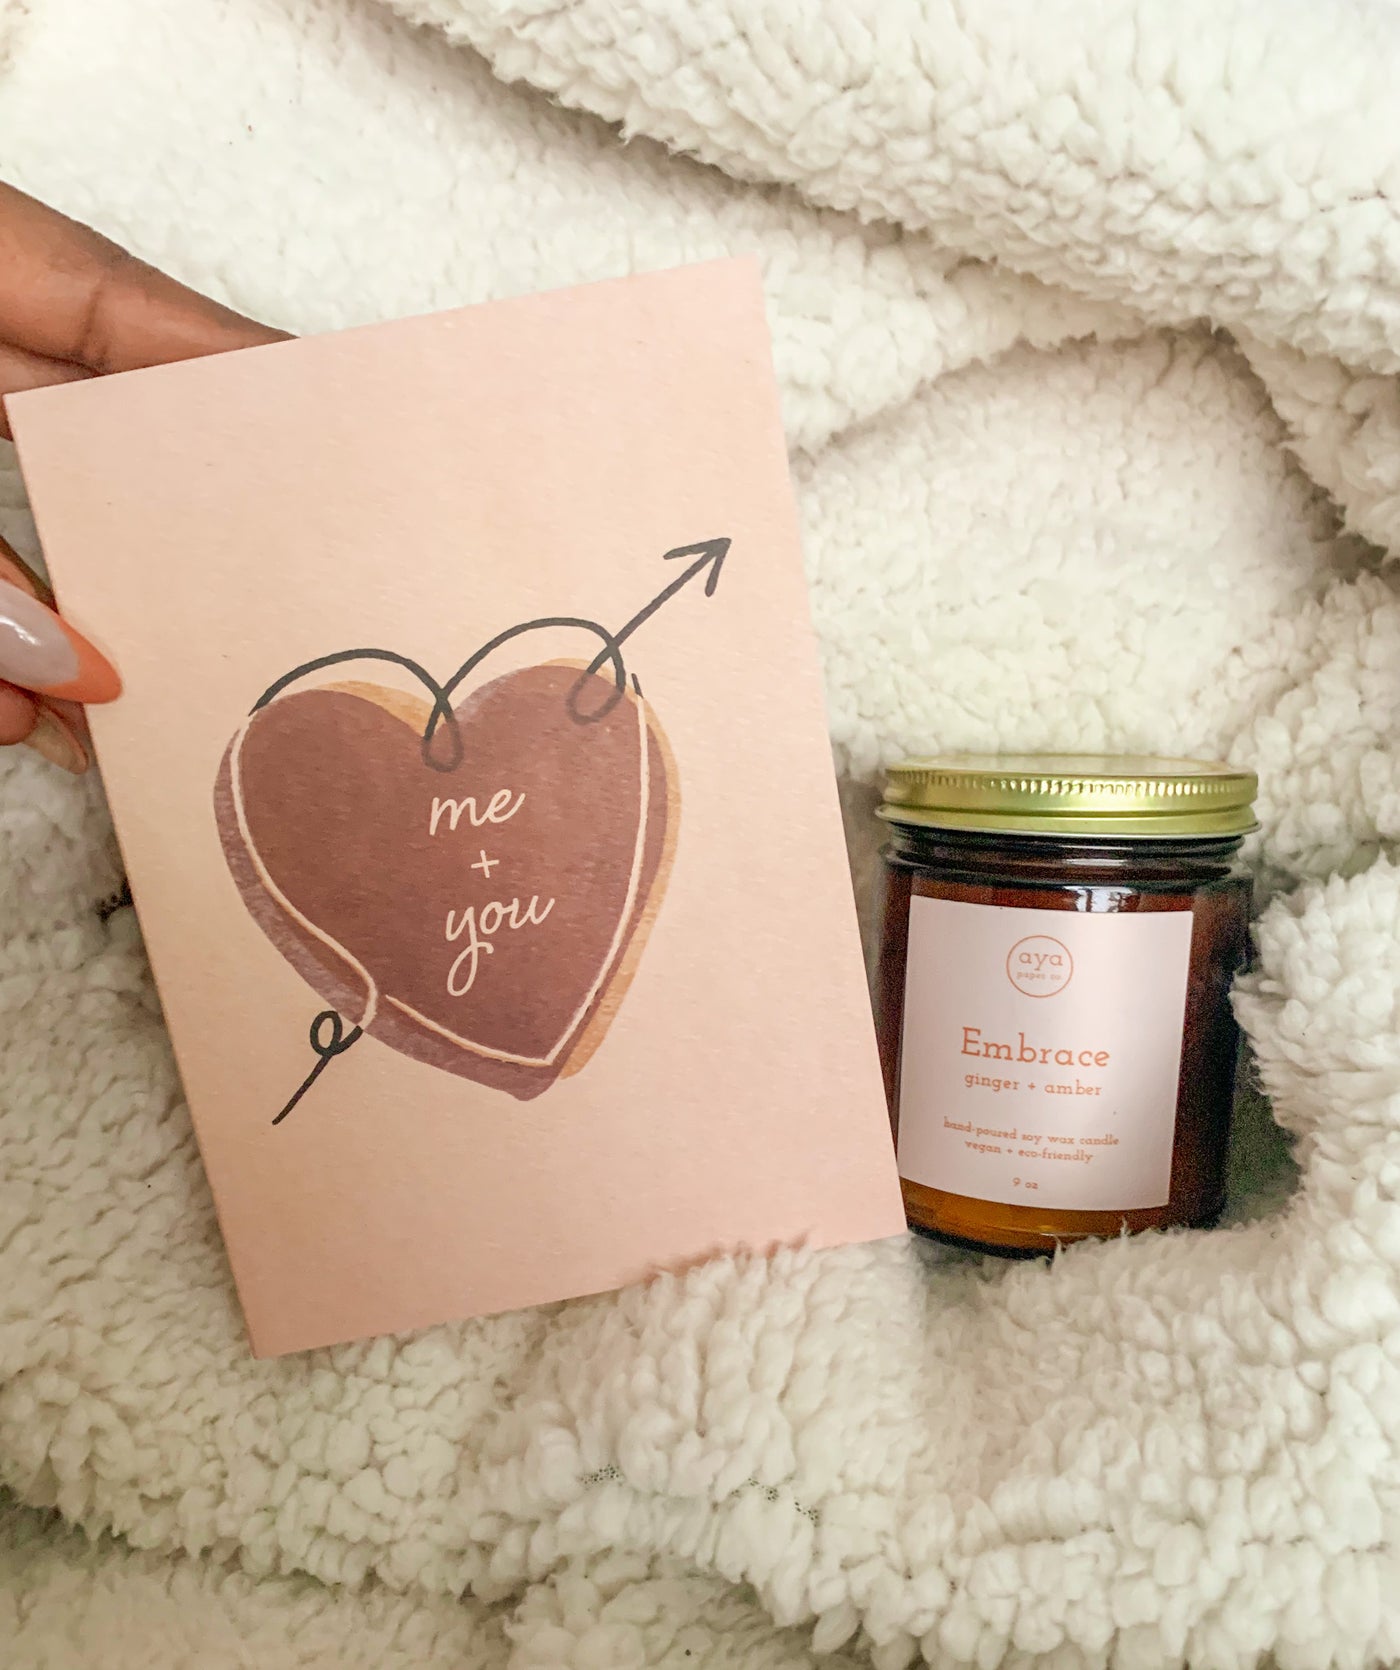 beige and pink colored "Me & You Romance Card" with a heart illustration and within the heart the text reads "Me + You" showcased next to an aya paper candle